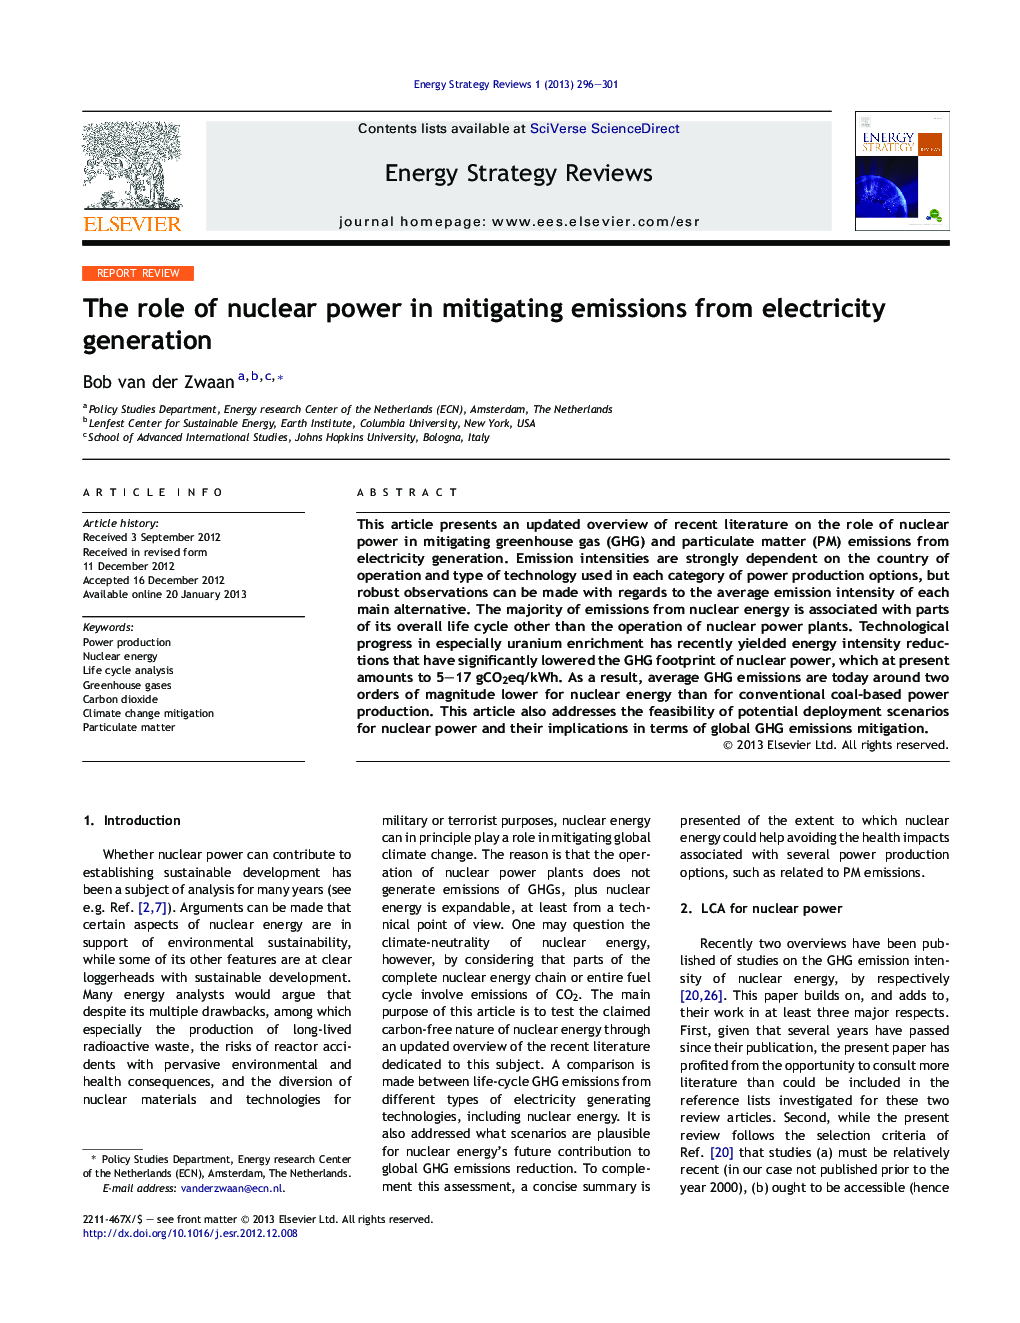 The role of nuclear power in mitigating emissions from electricity generation